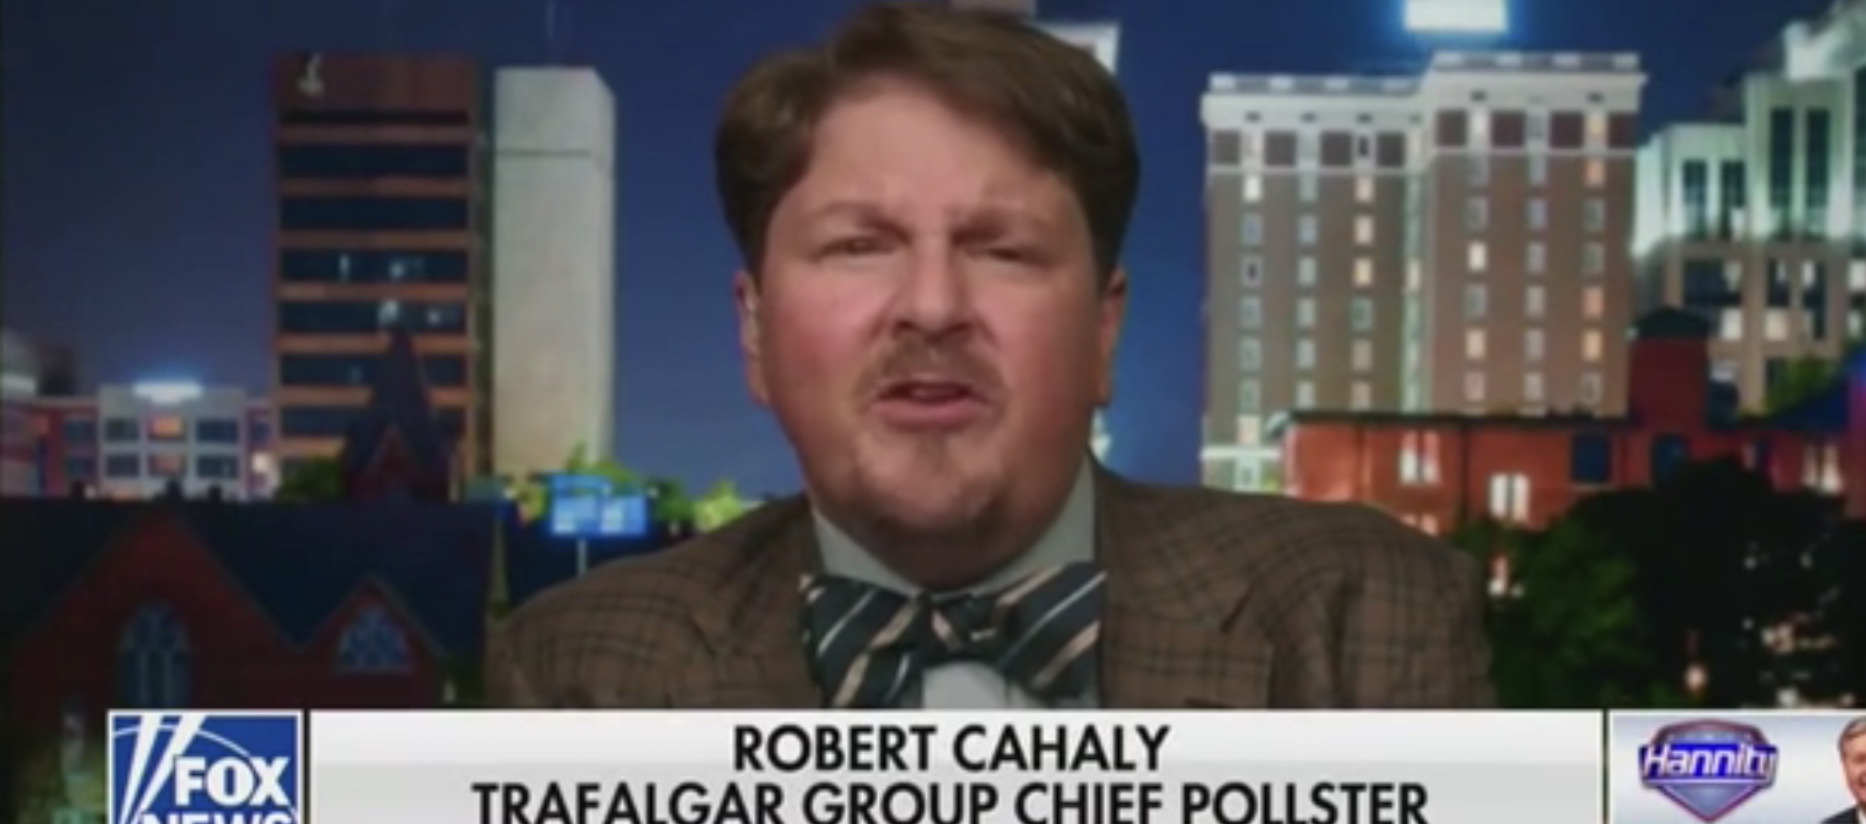 Trafalgar Group chief pollster Robert Cahaly talks to Fox News’ “Hannity” about the “hidden” vote for President Donald Trump that might see him reelected, Oct. 20 2020. Fox News screenshot